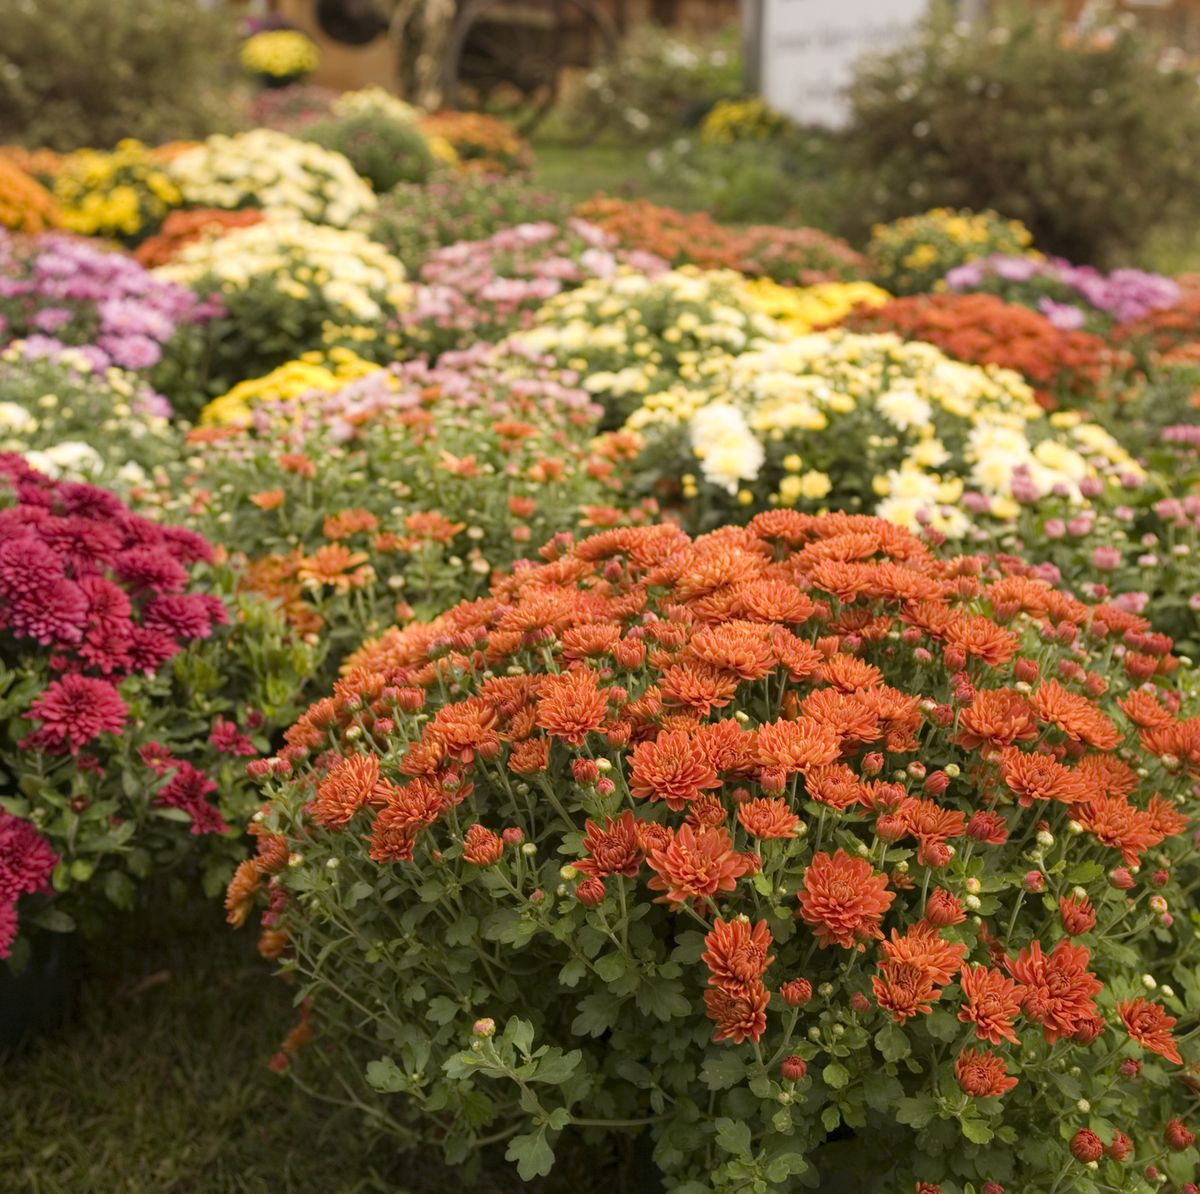 How To Grow Mums: Complete Care Guide For a Fall Favorite